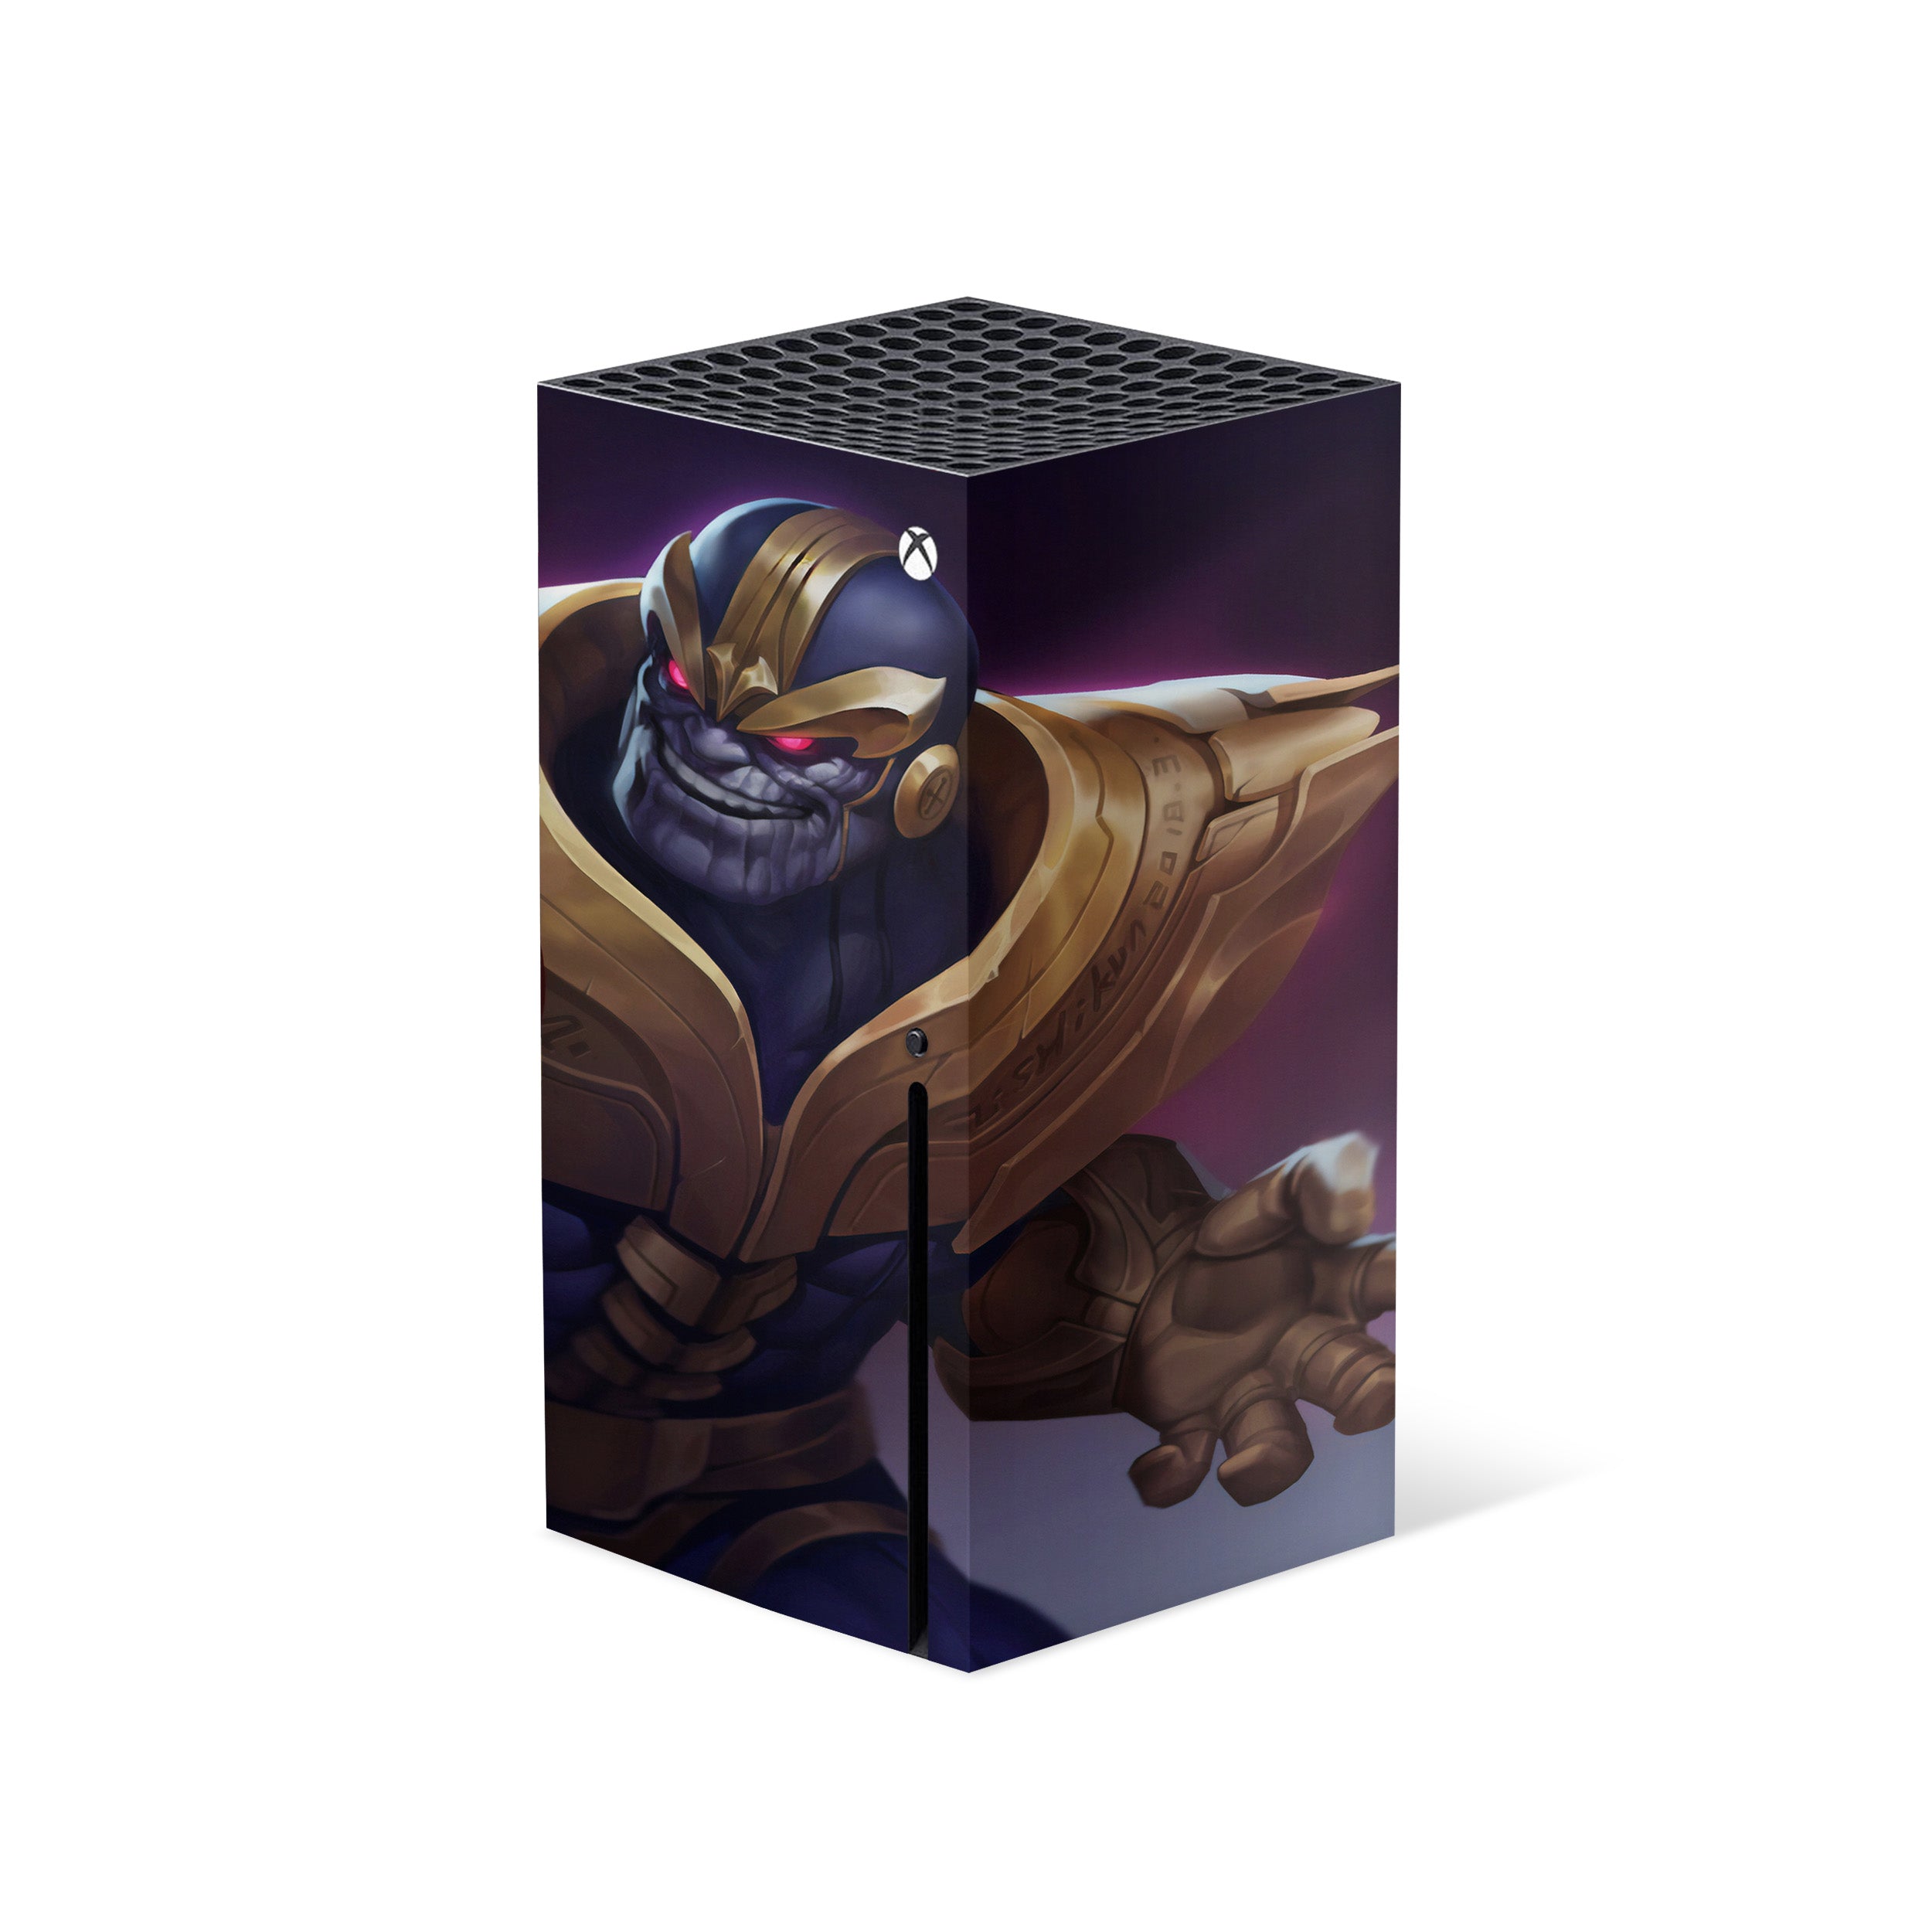 A video game skin featuring a Marvel Comics Thanos design for the Xbox Series X.